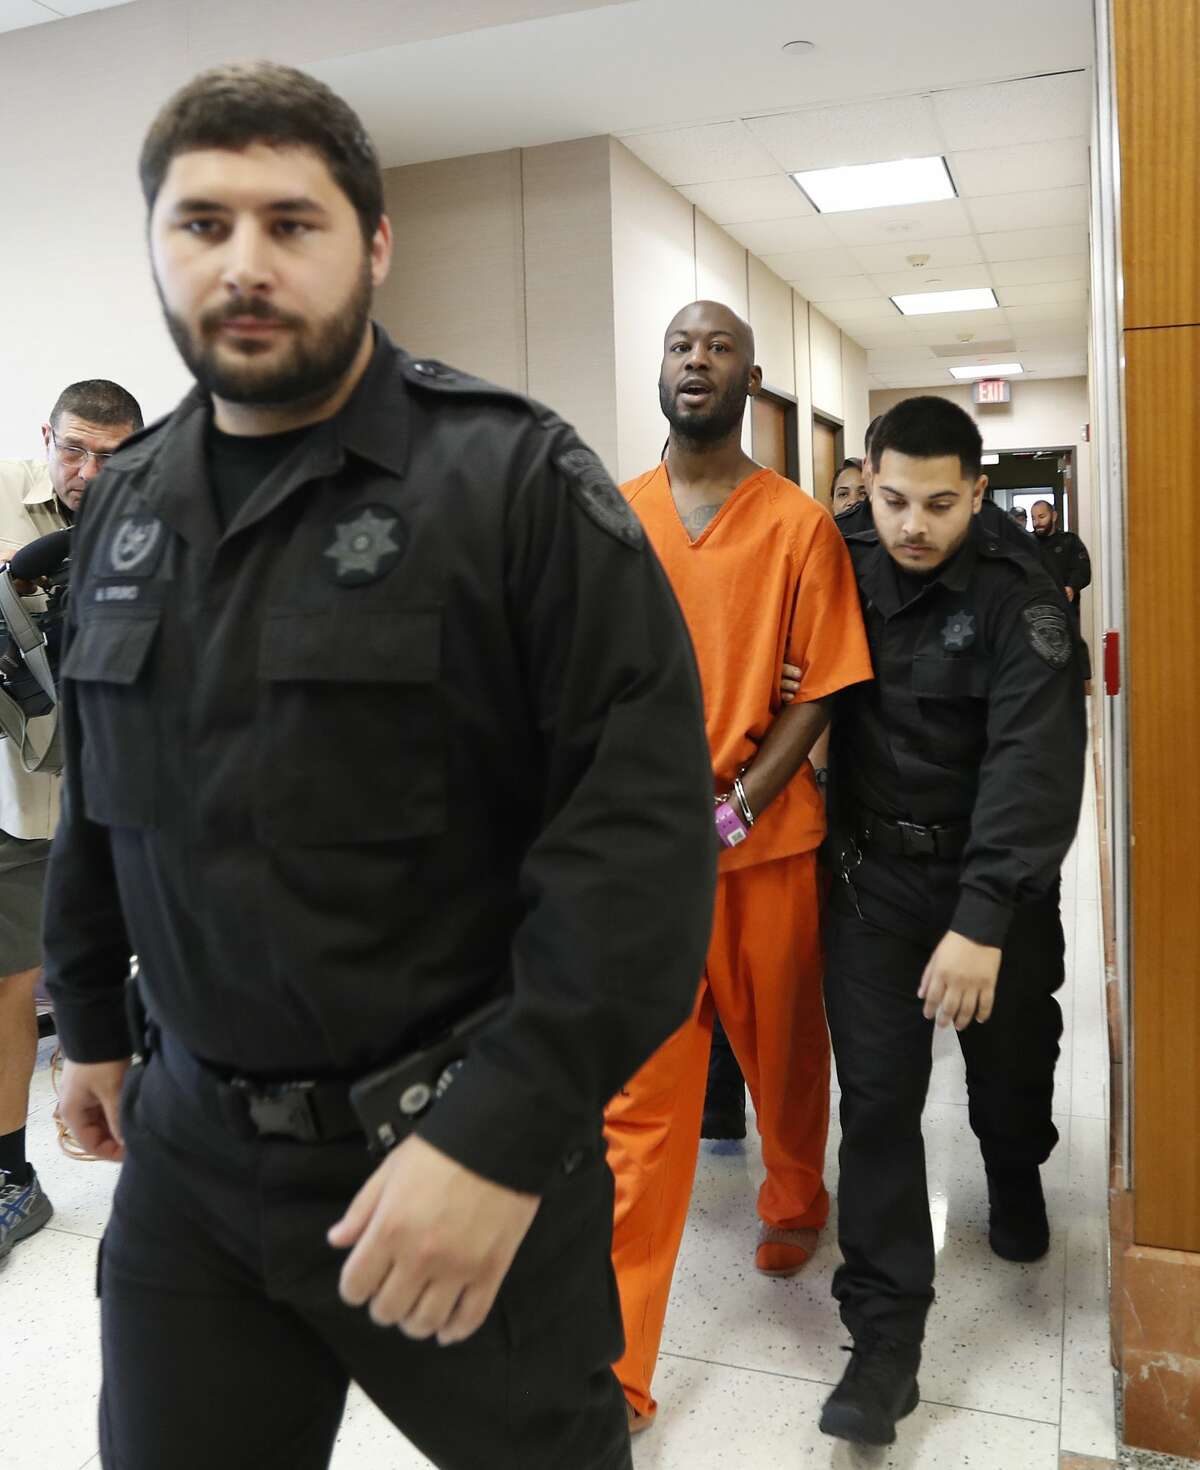 Houston police officers walk Andre Jackson - charged with the 2016 murder of 11-year-old Josue Flores, down the hallway of the Harris County Criminal Courts, Wednesday, June 19, 2019, in Houston. As he was being led to a back stairway, he said "I'm Grace Jones' son, fox."